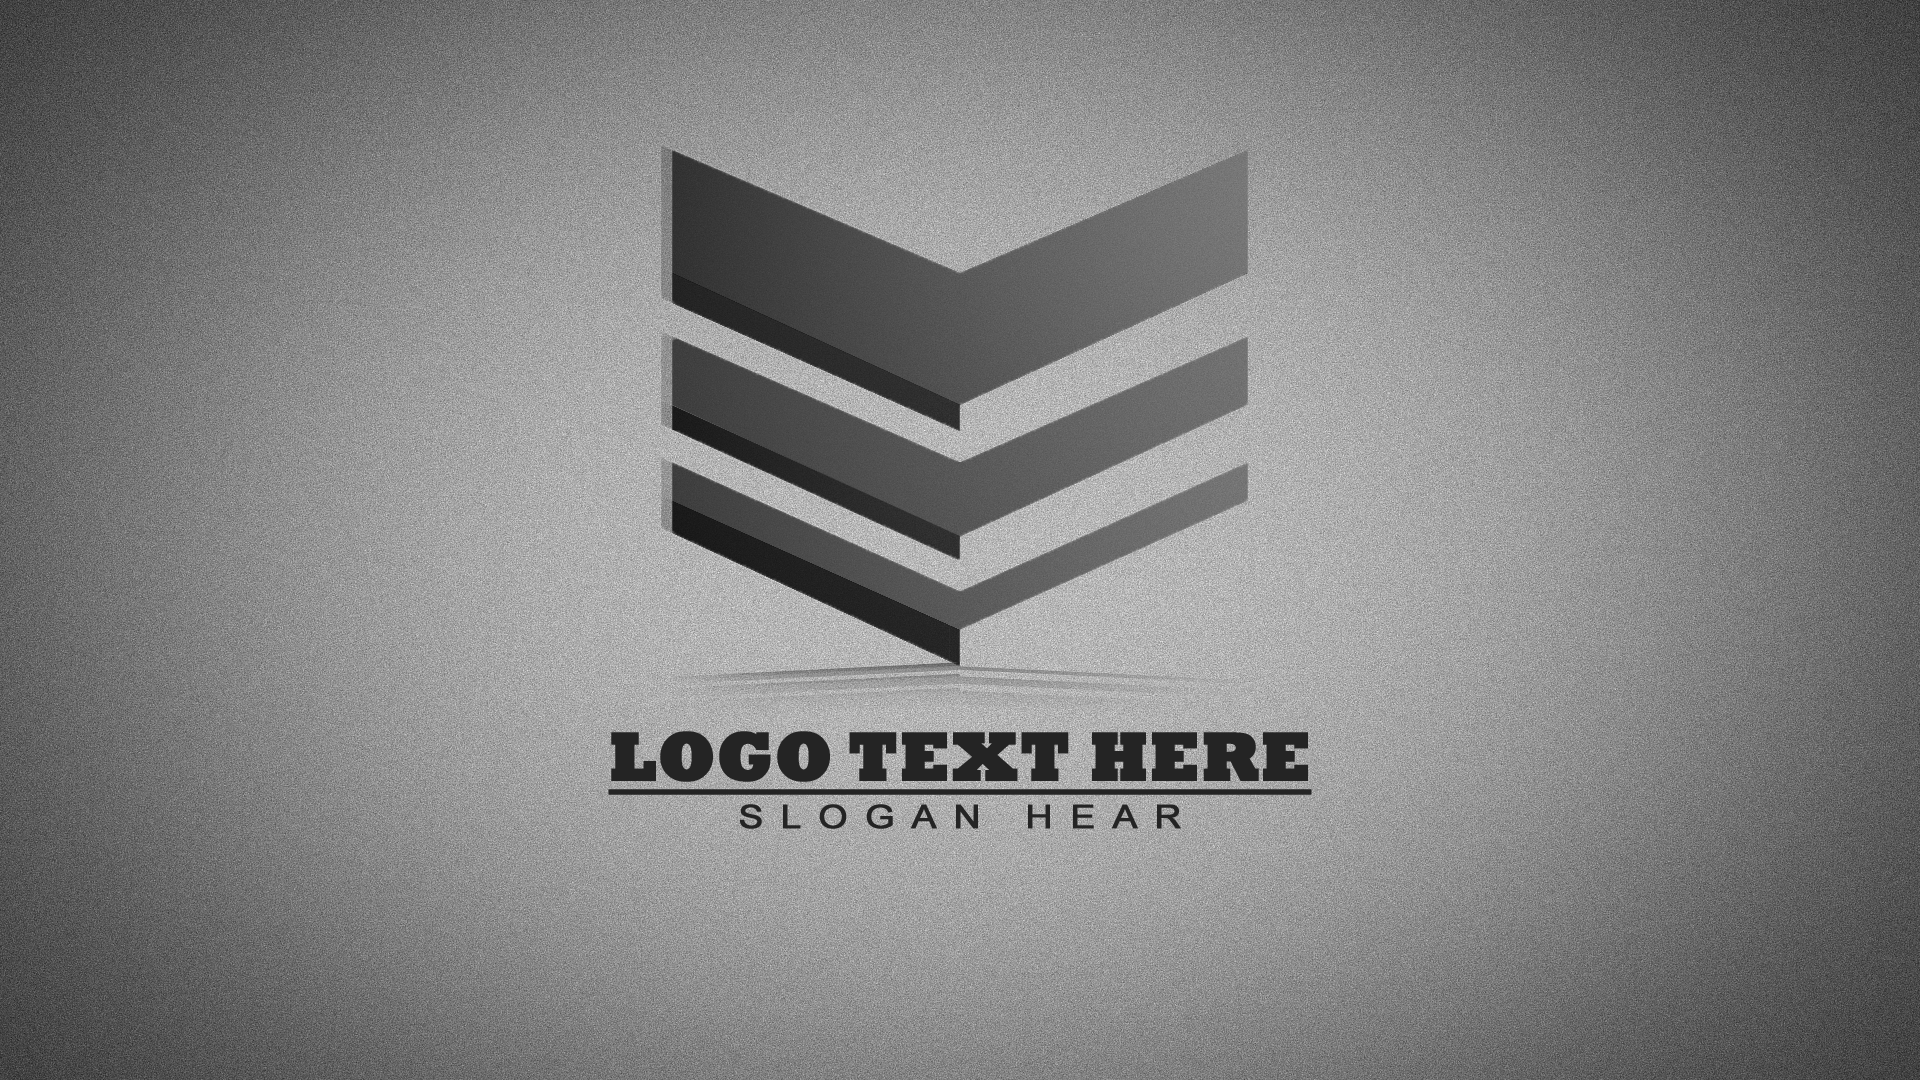 Logo Design 8 Great Logos With Hidden Meanings Infographic Visualistan ...